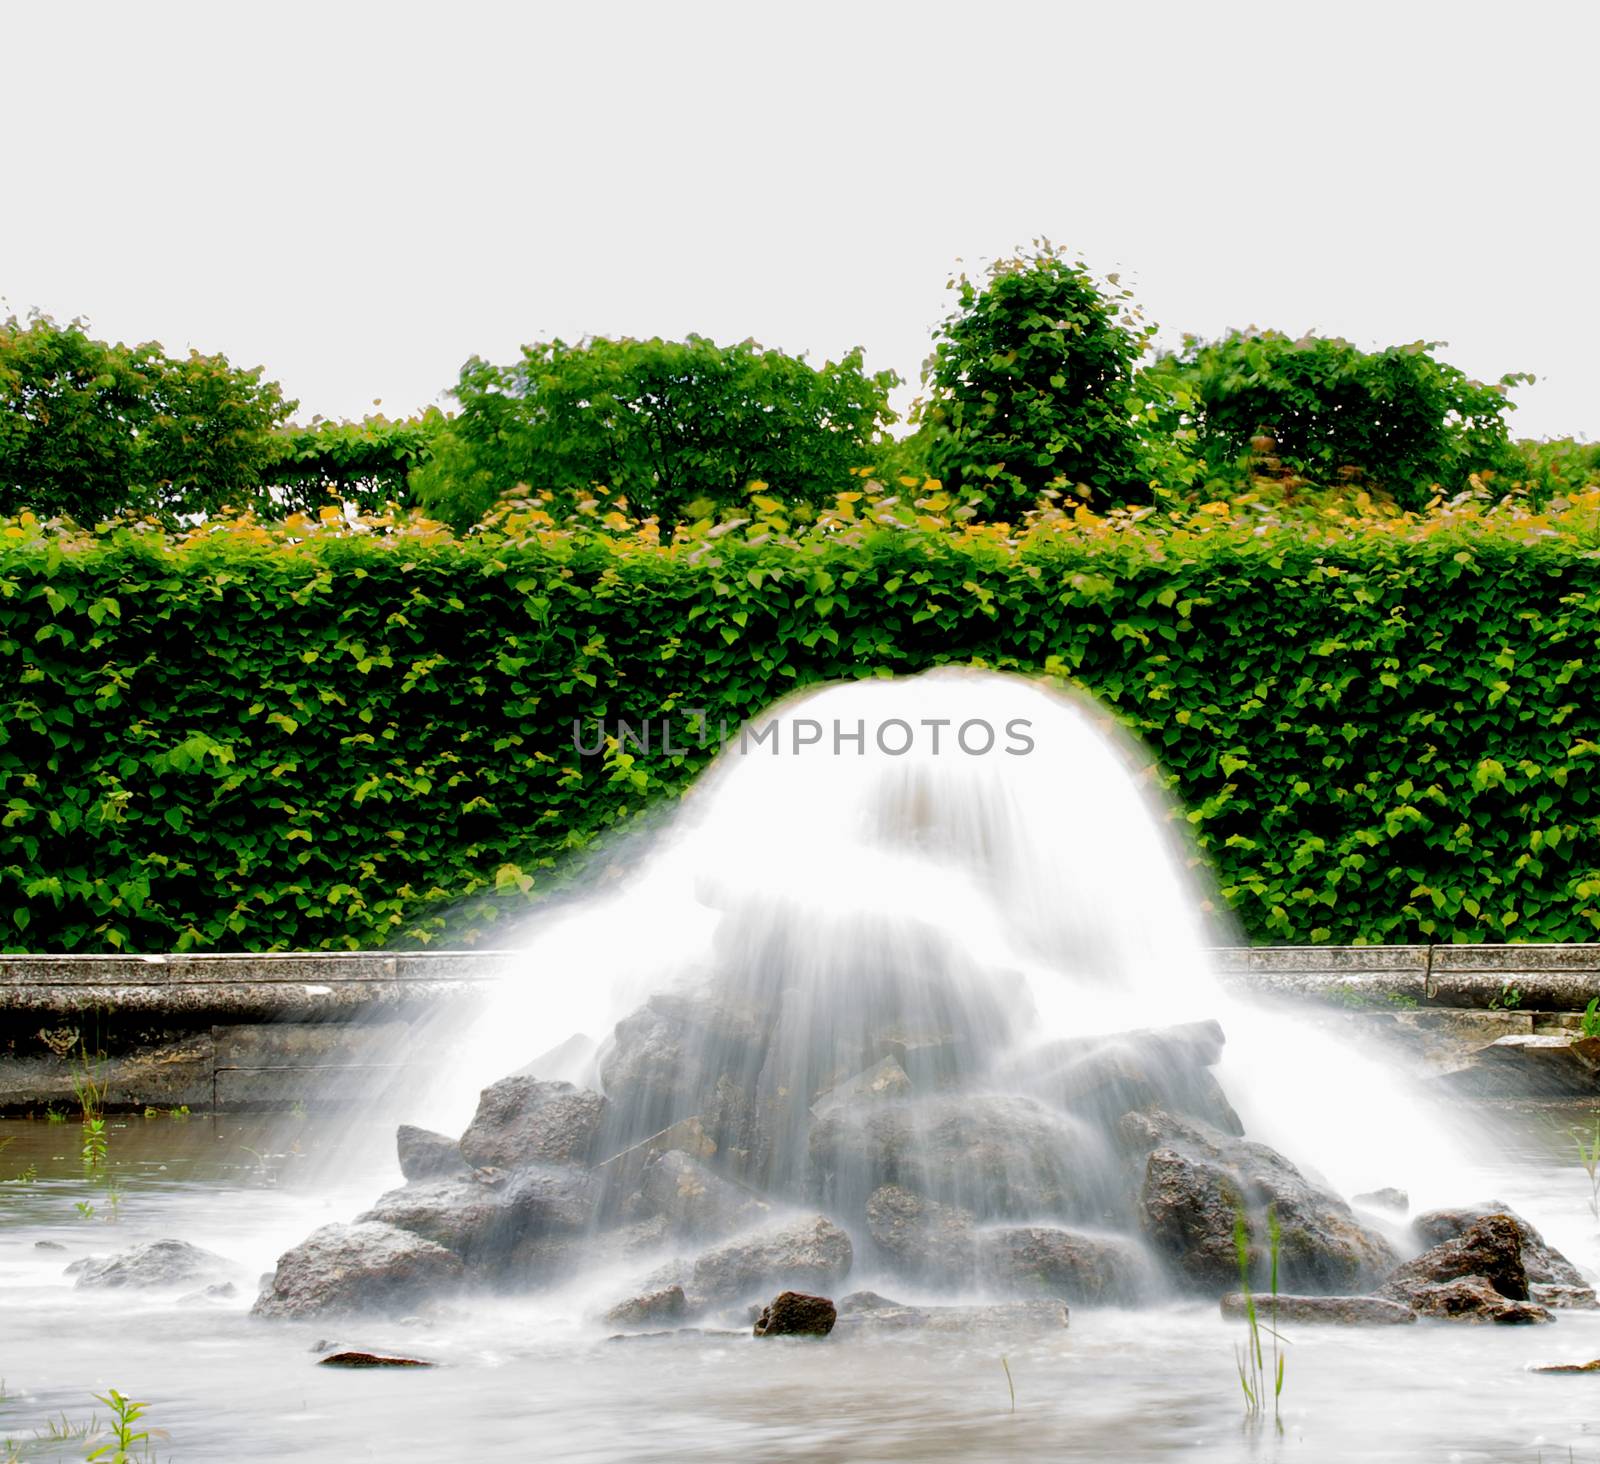 Decorative Fountain with Flowing Softly Water between Formal Garden Outdoors